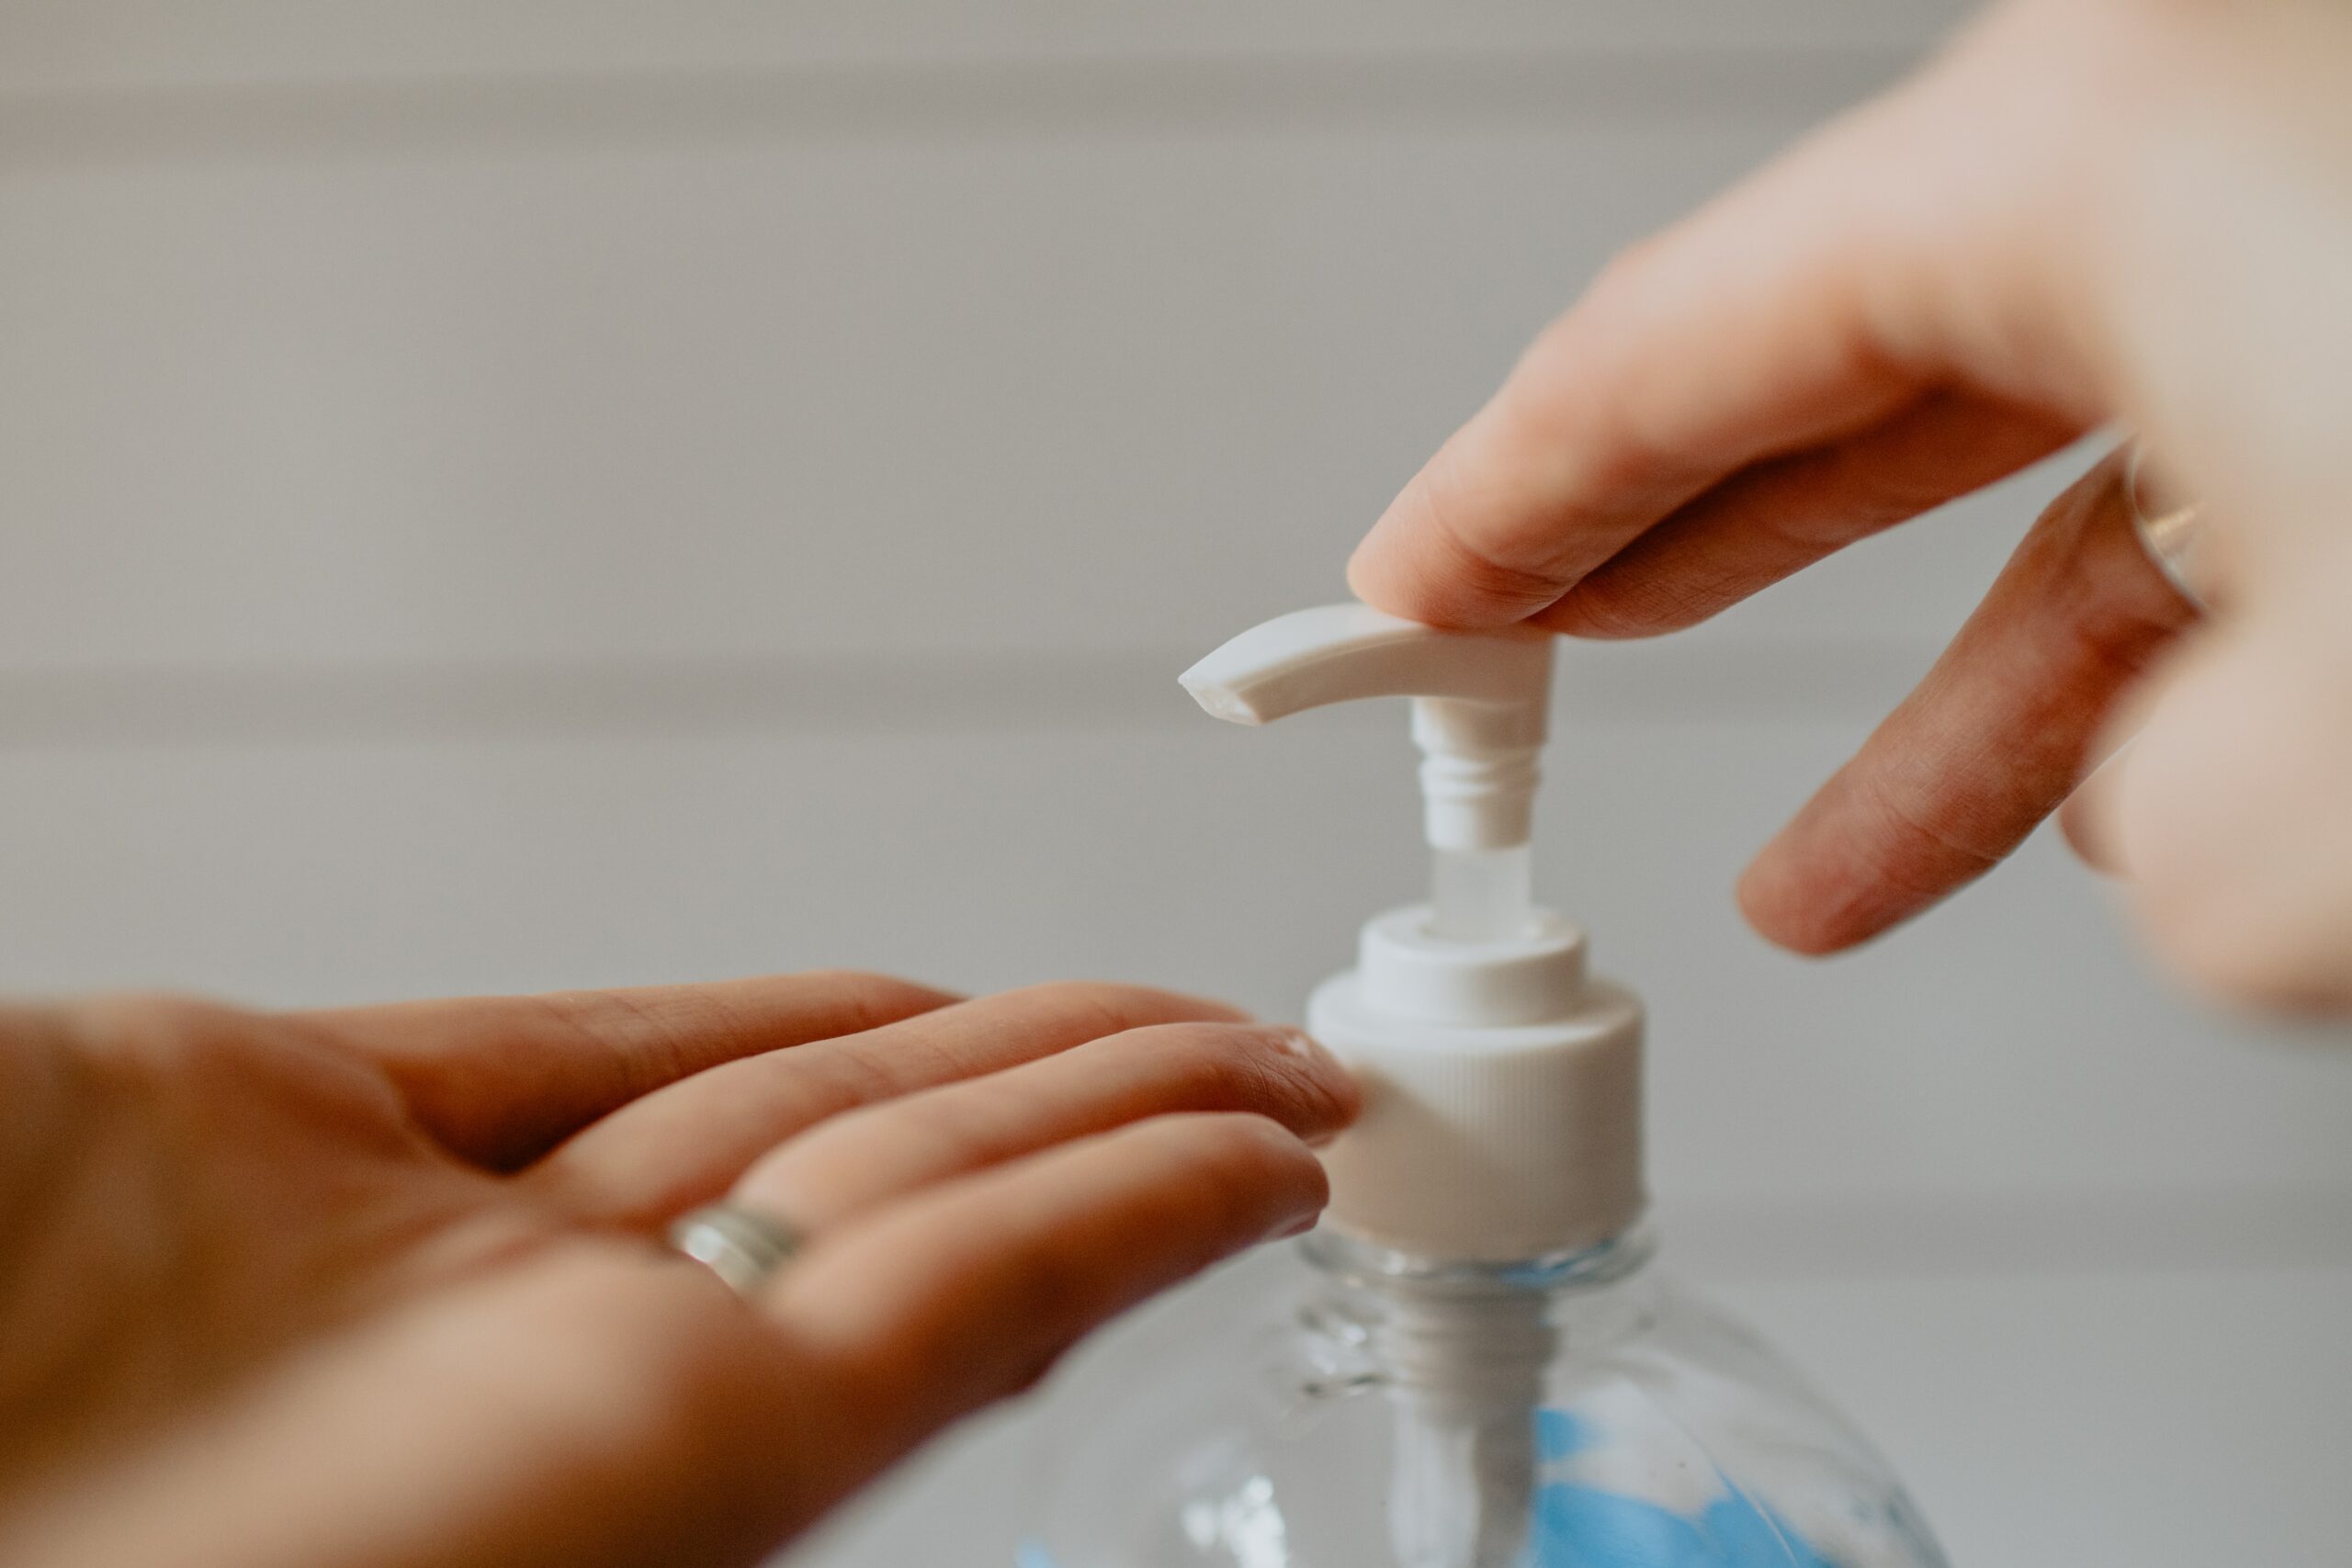 Most DIY Hand Sanitizer Recipes Don't Work—Here's What to Use Instead